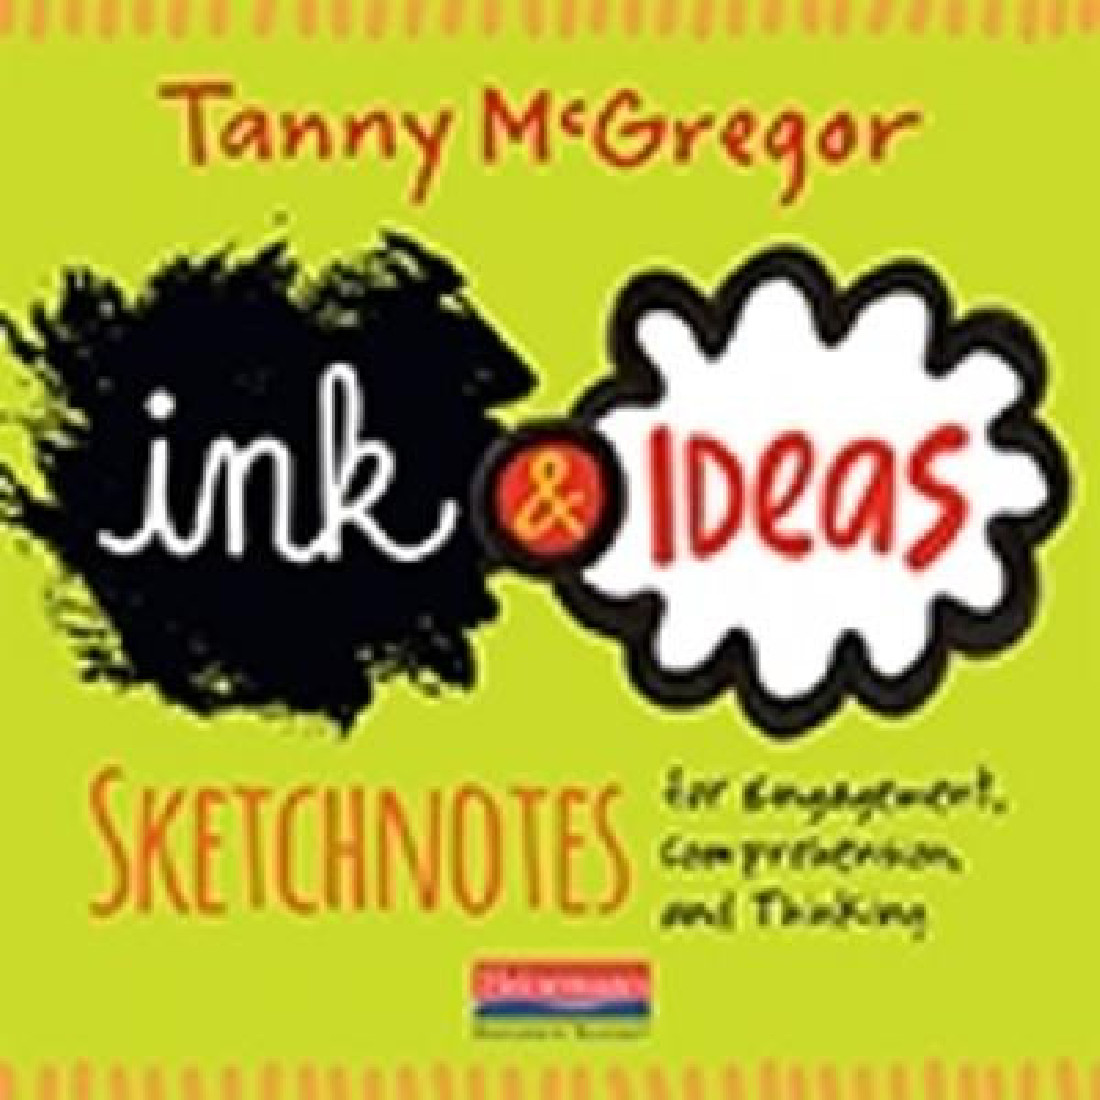 INK AND IDEAS BY T. MCGREGOR